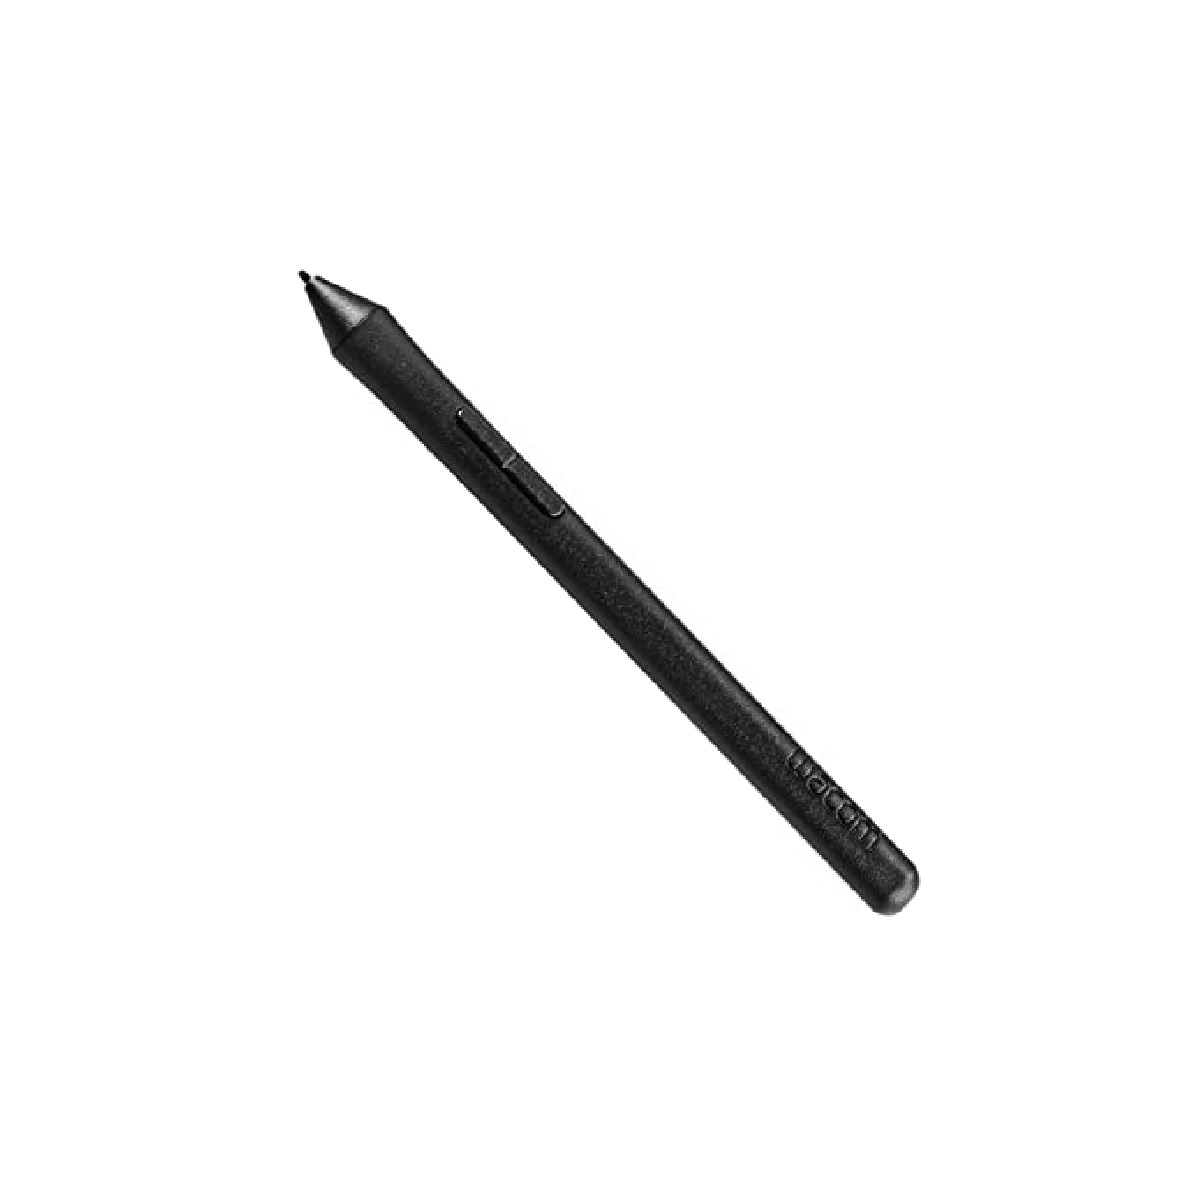 Pen for Intuos (Art, Comic, Draw and Photo)